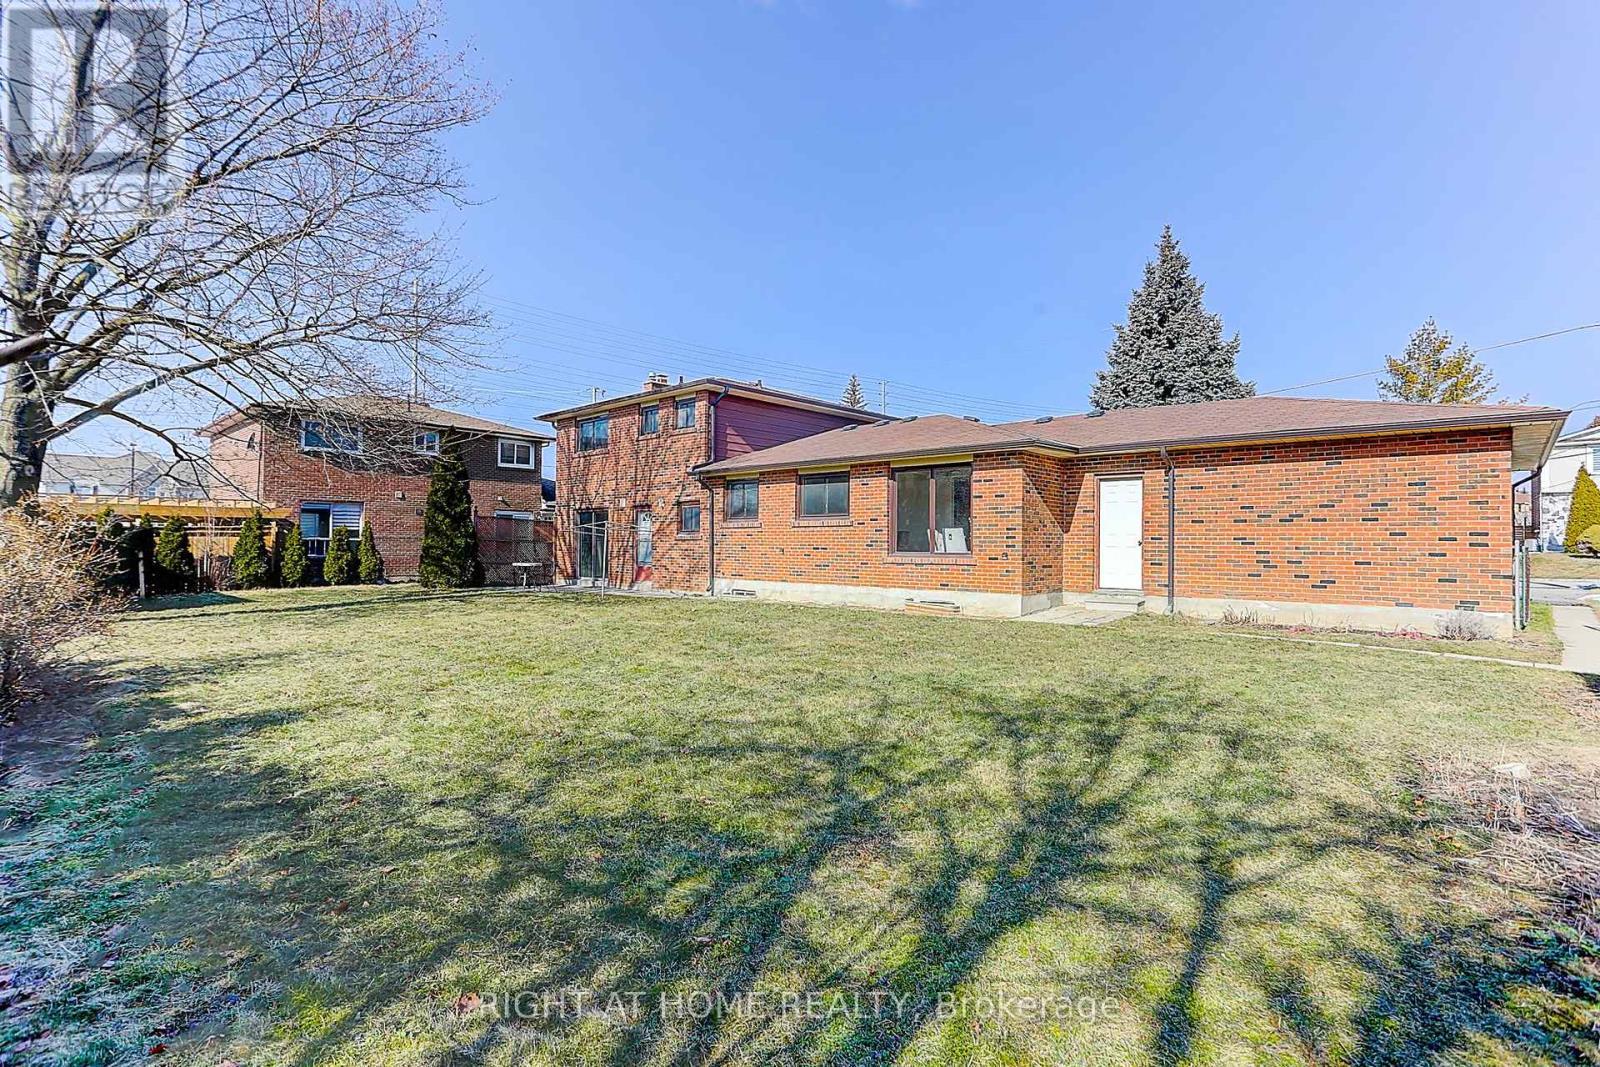 












87 STOCKDALE CRES

,
Richmond Hill,




Ontario
L4C3T1

